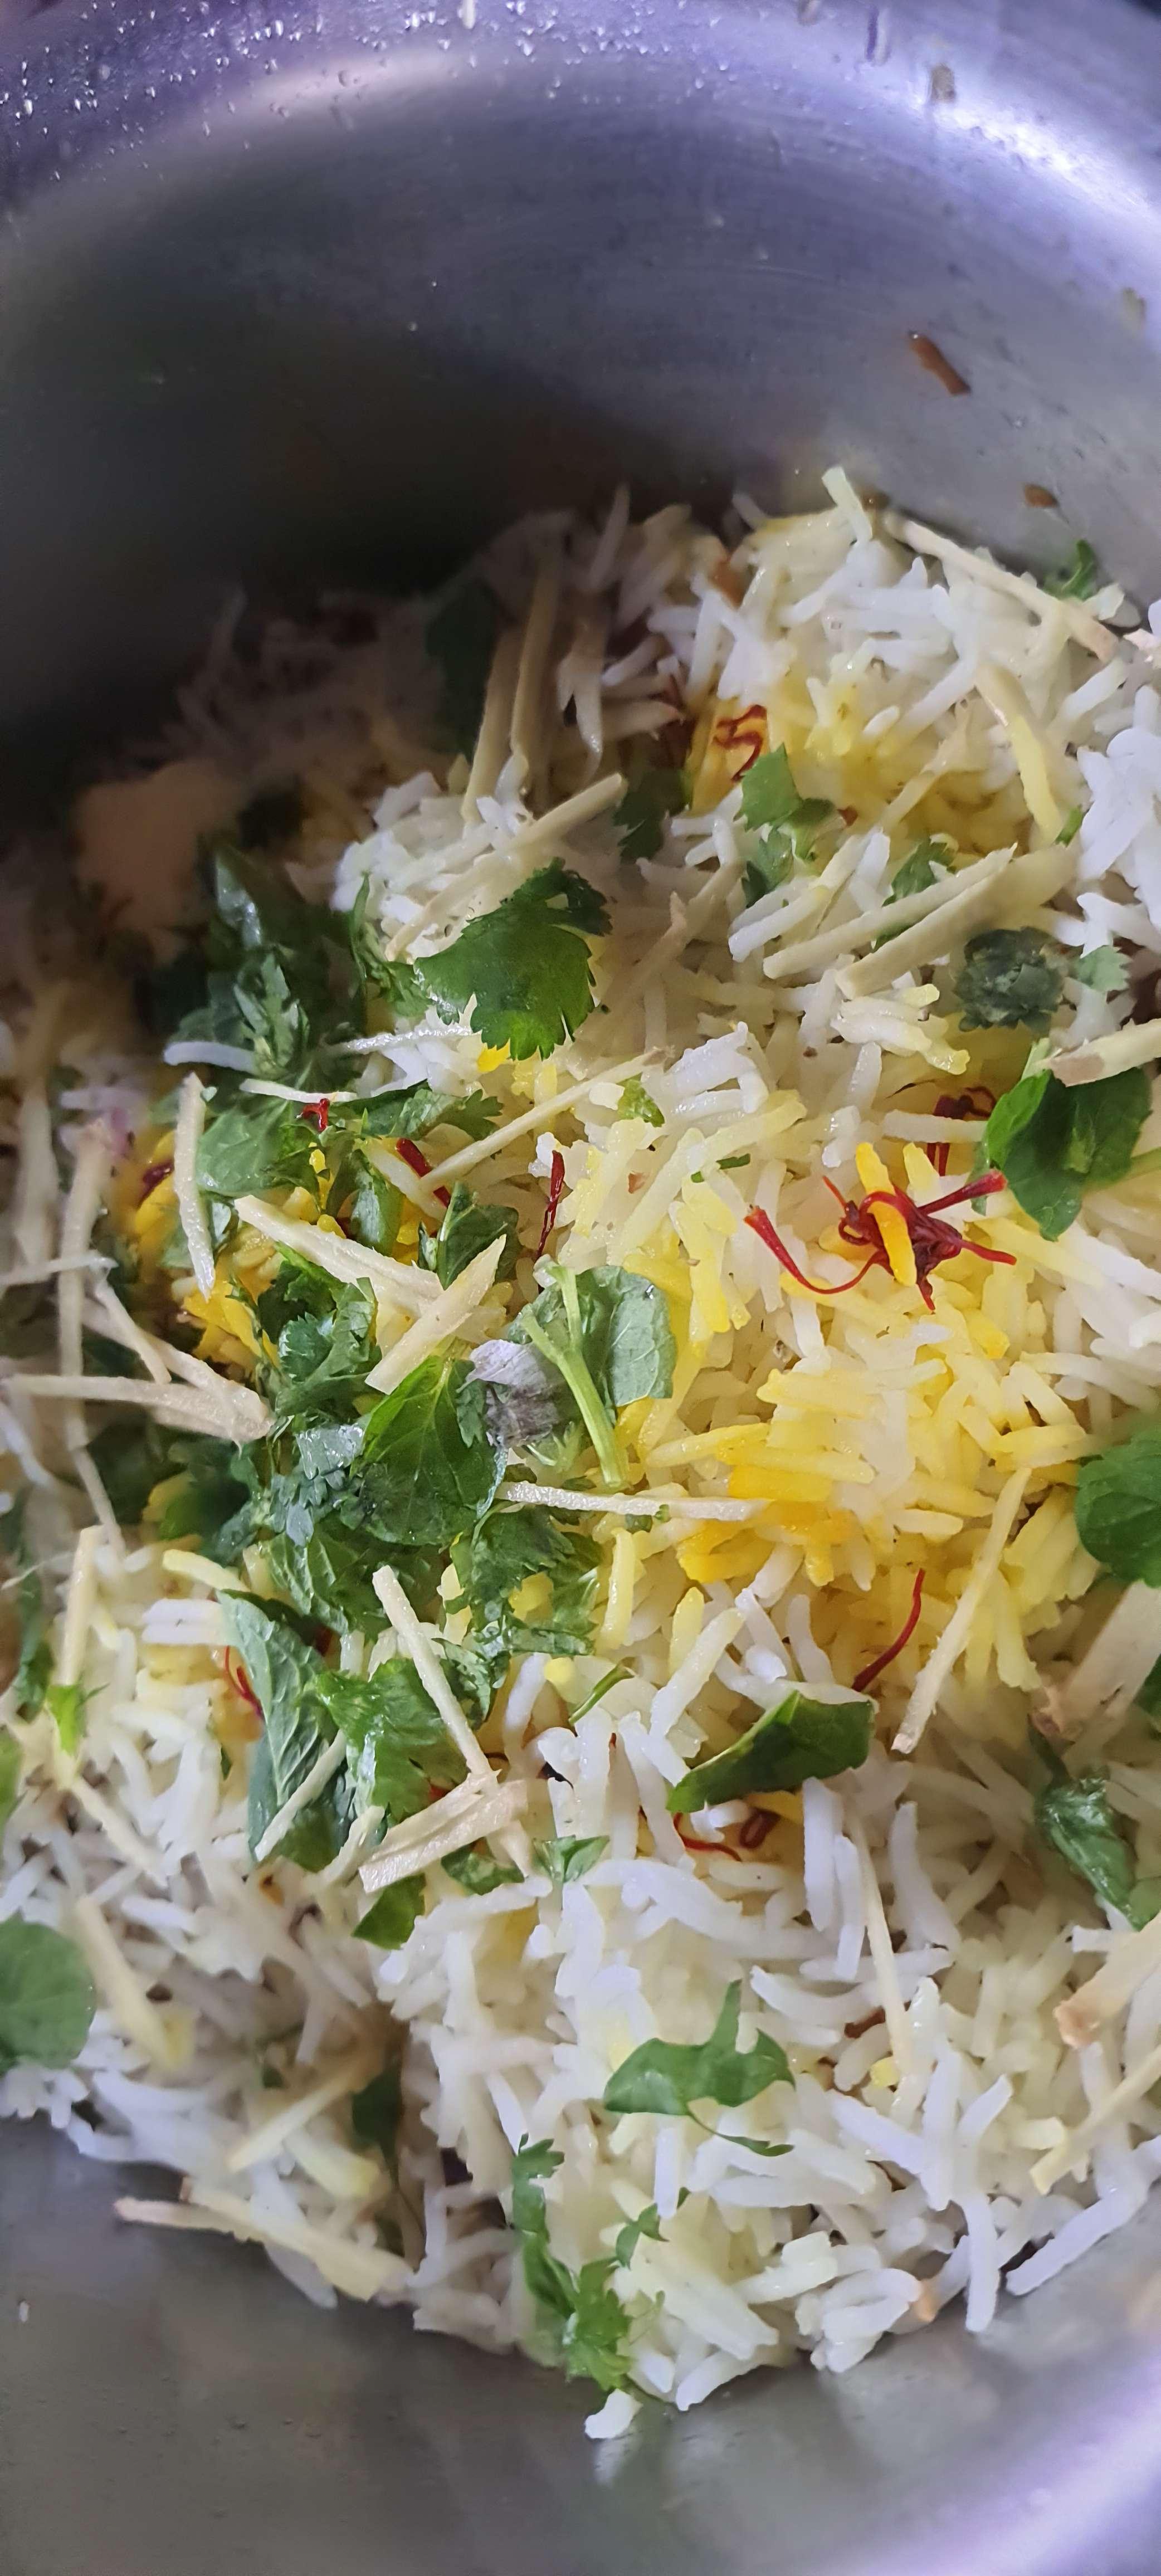 Tasty Veg Biryani cooked by COOX chefs cooks during occasions parties events at home